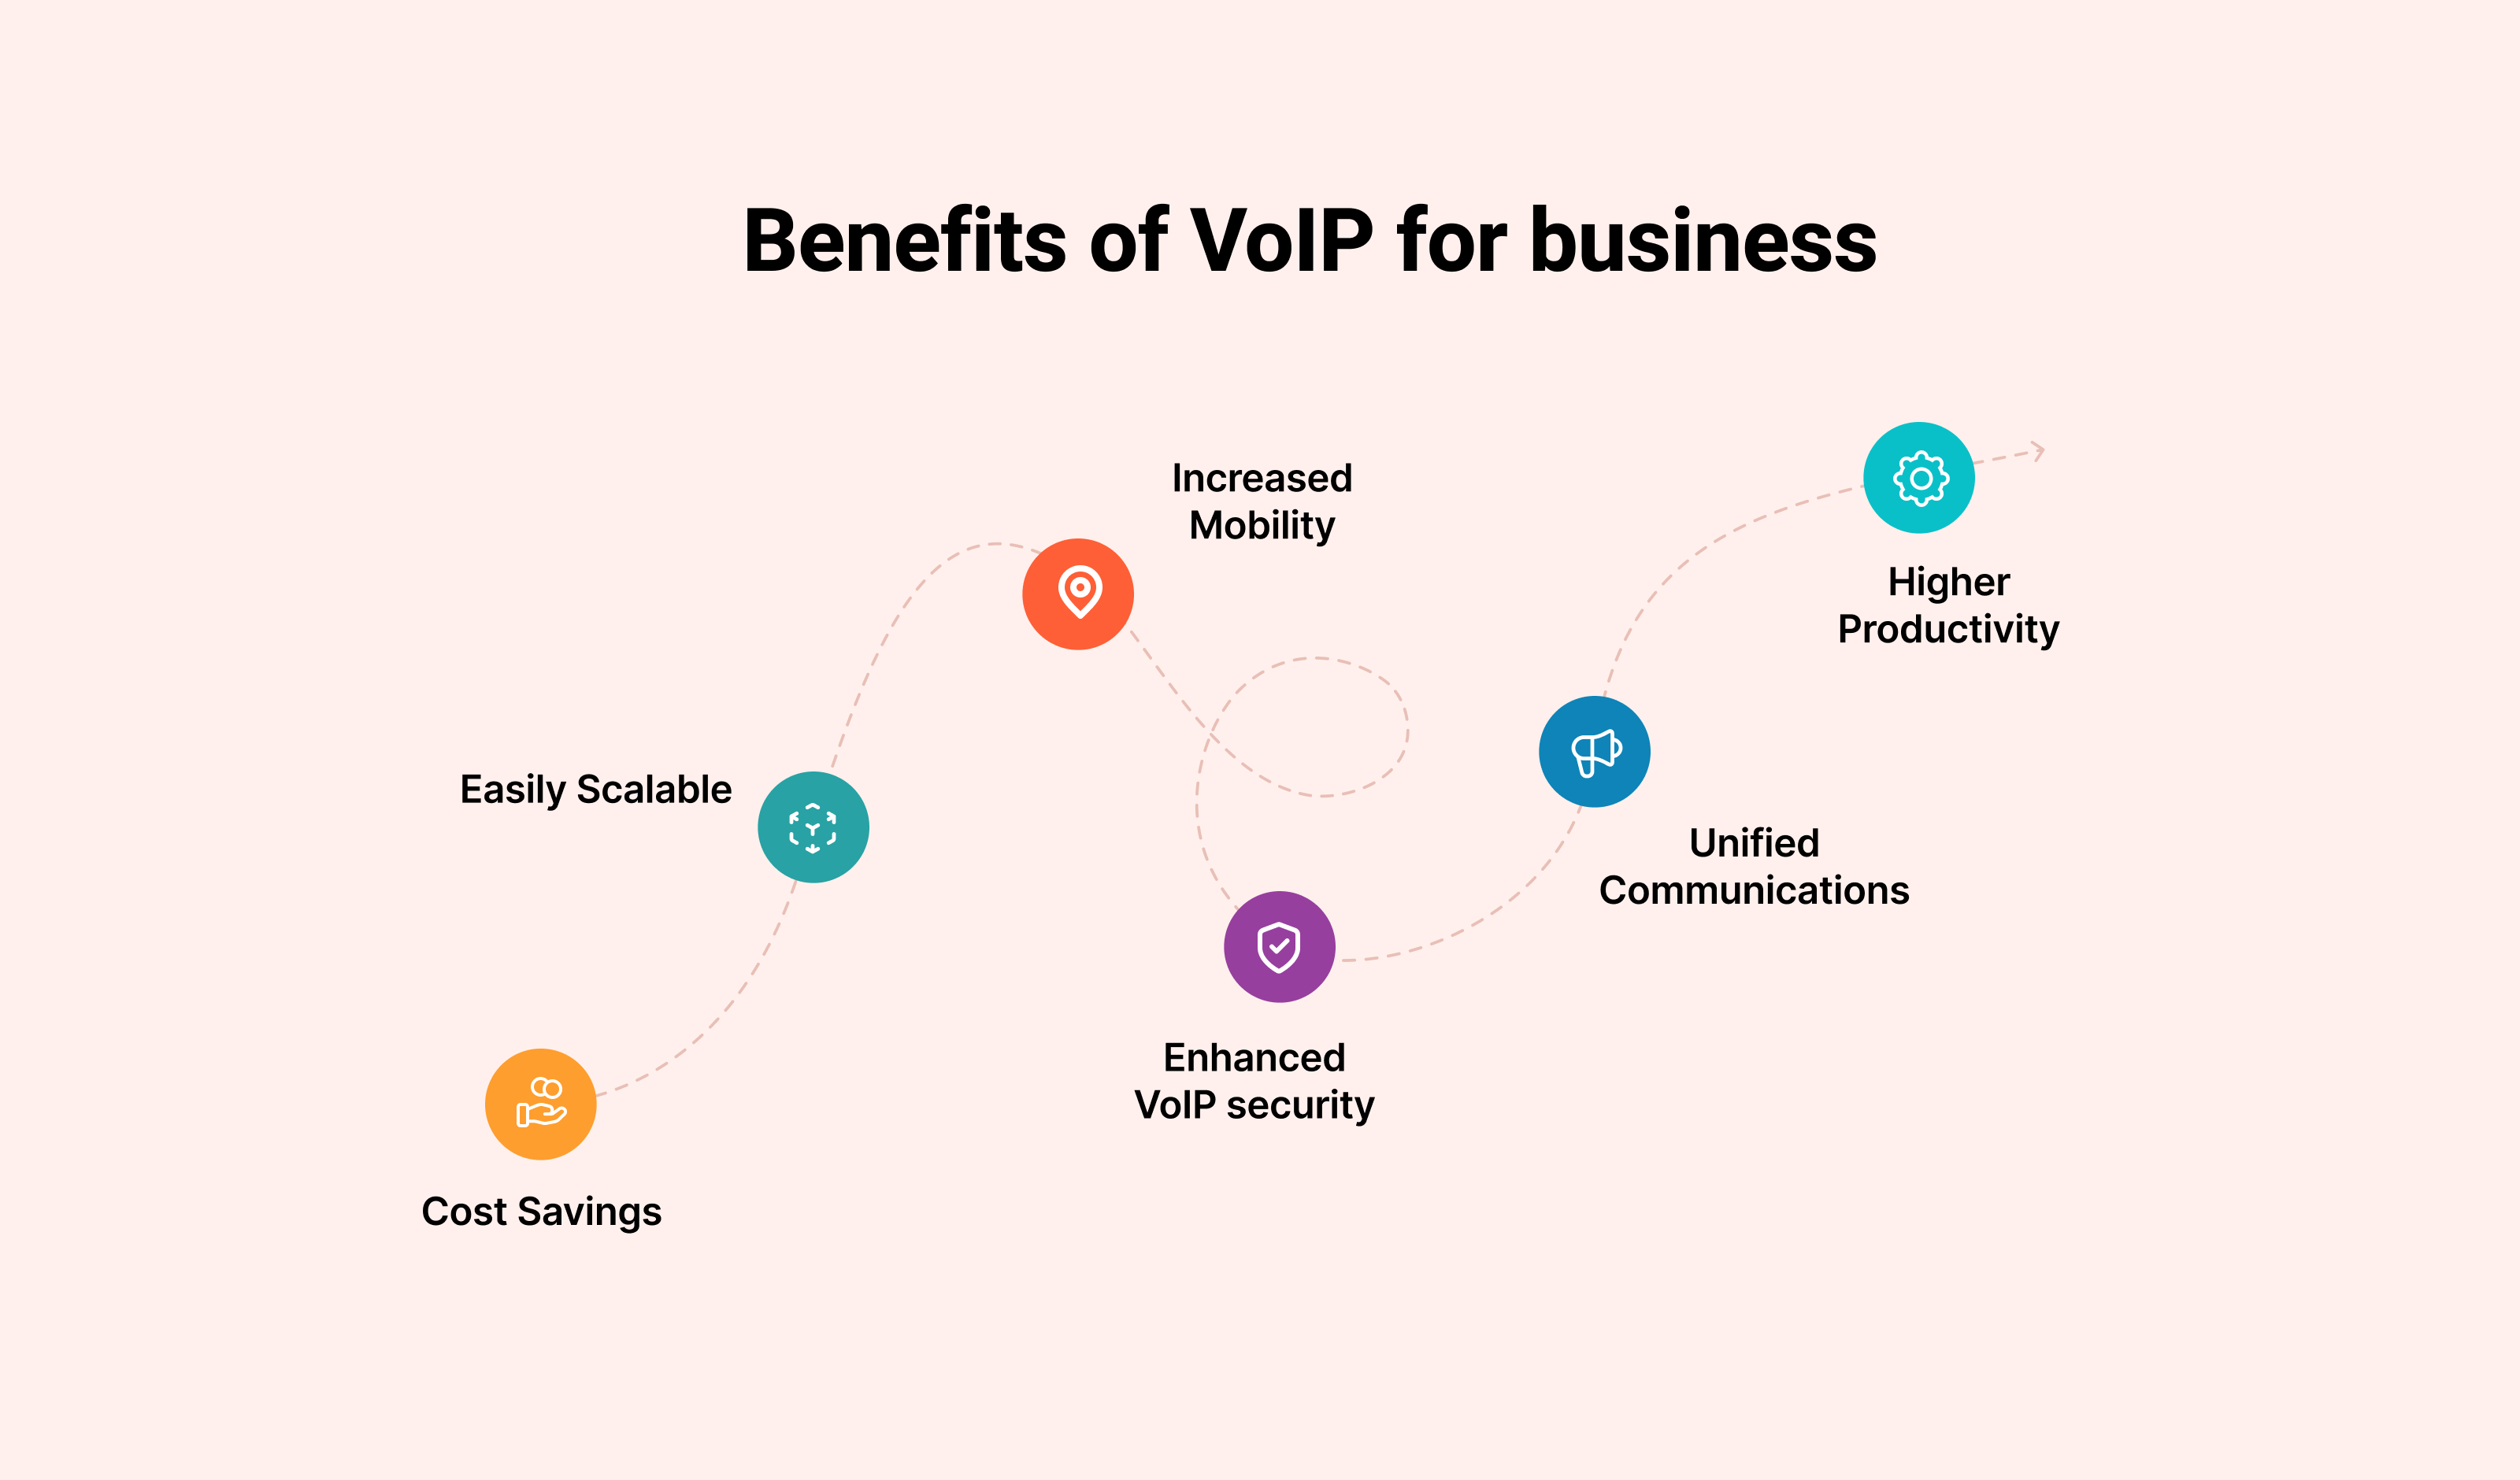 Benefits of VoIP for business: